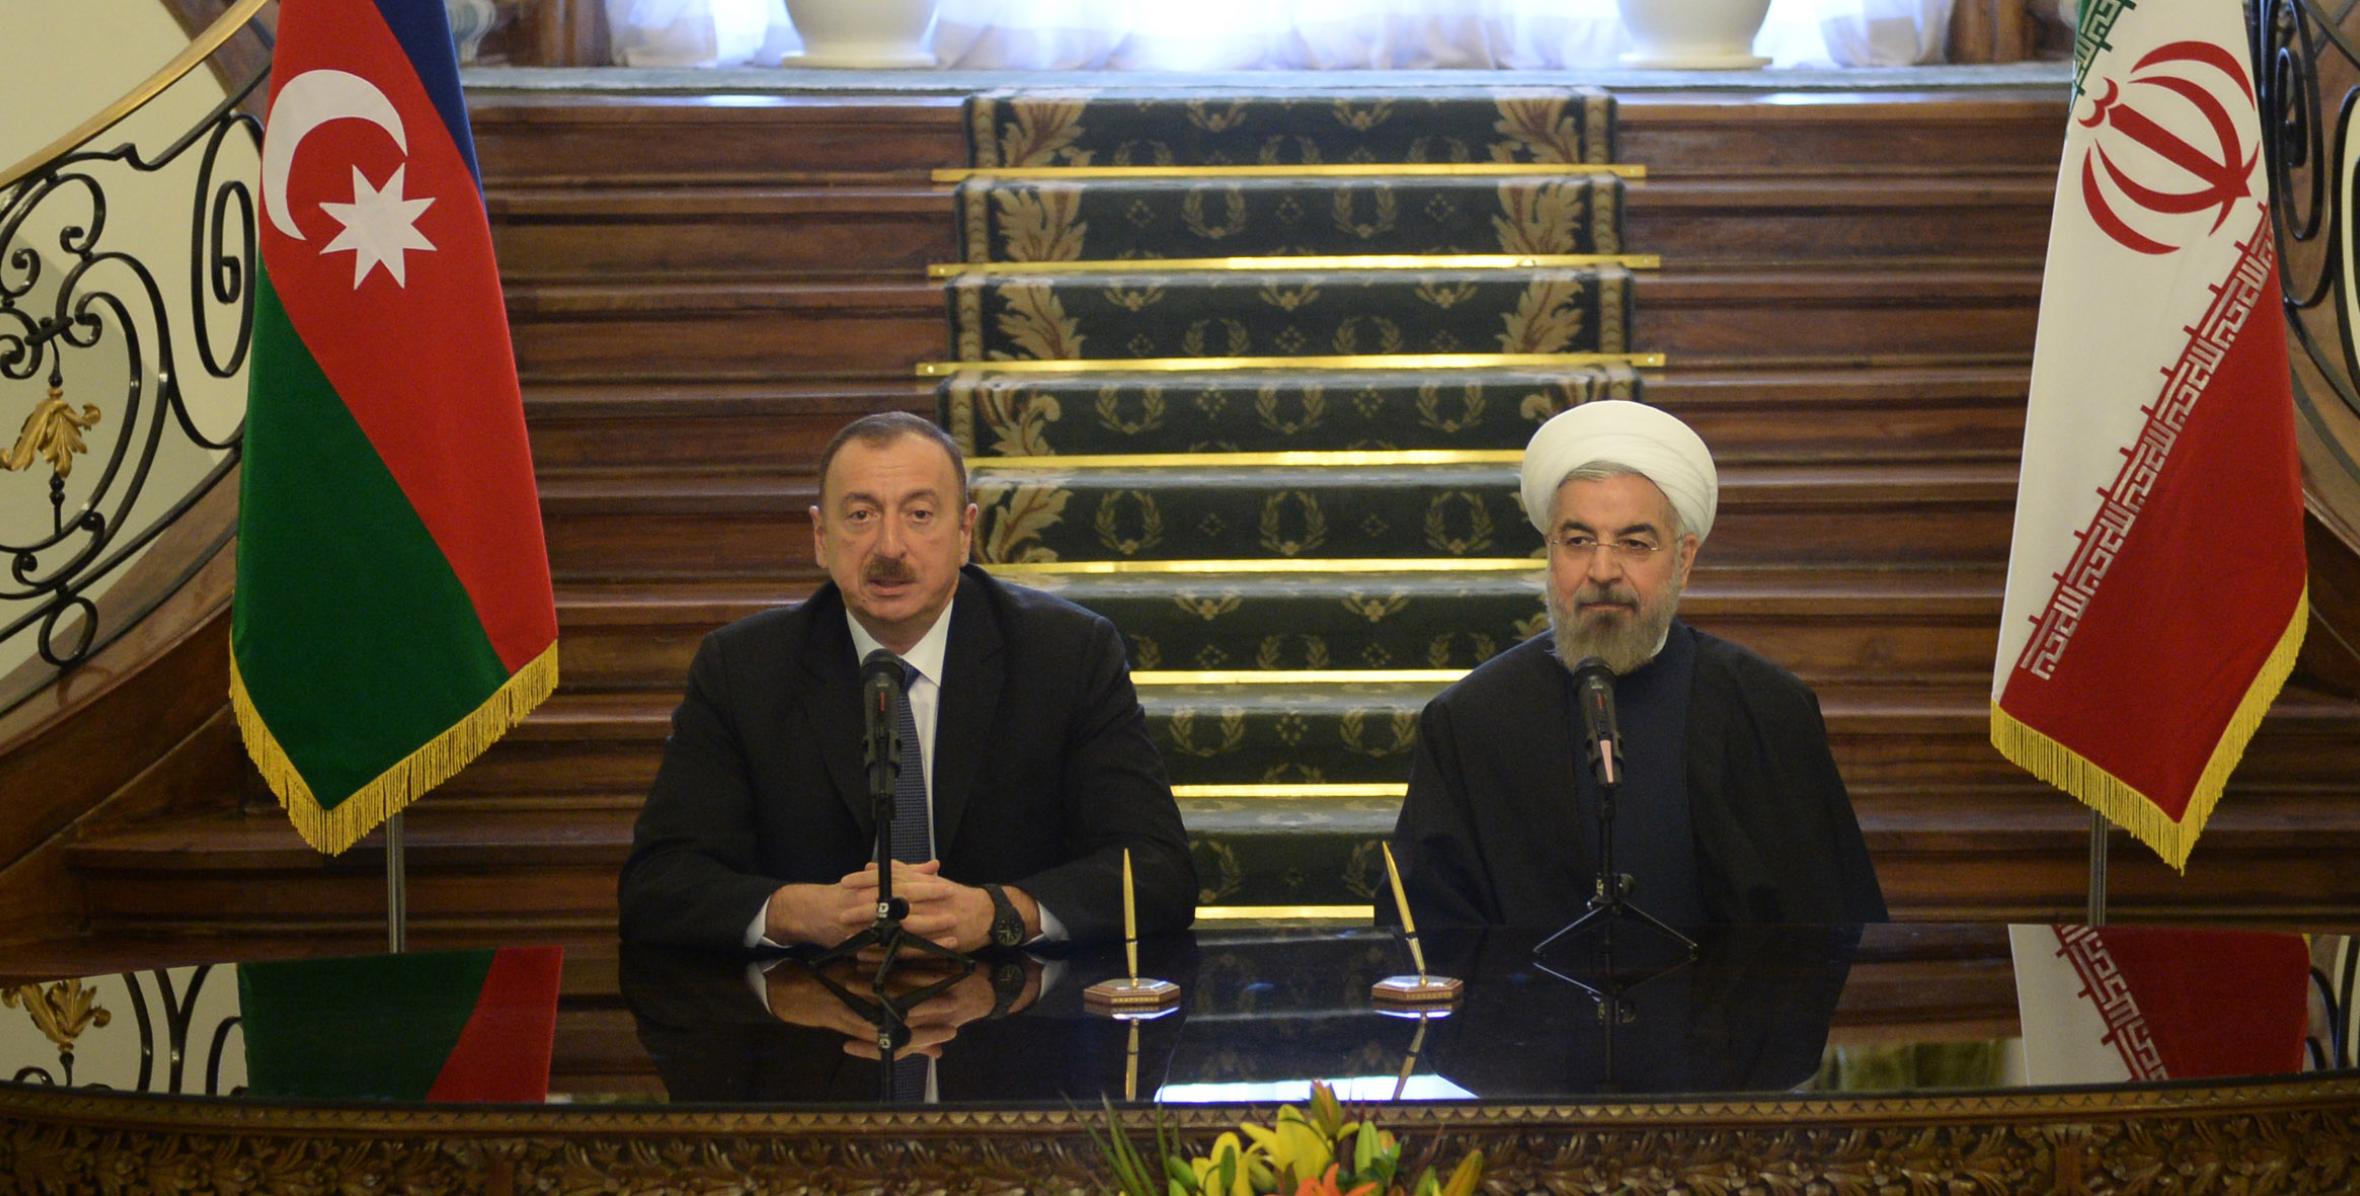 Presidents of Azerbaijan and Iran made statements for the press